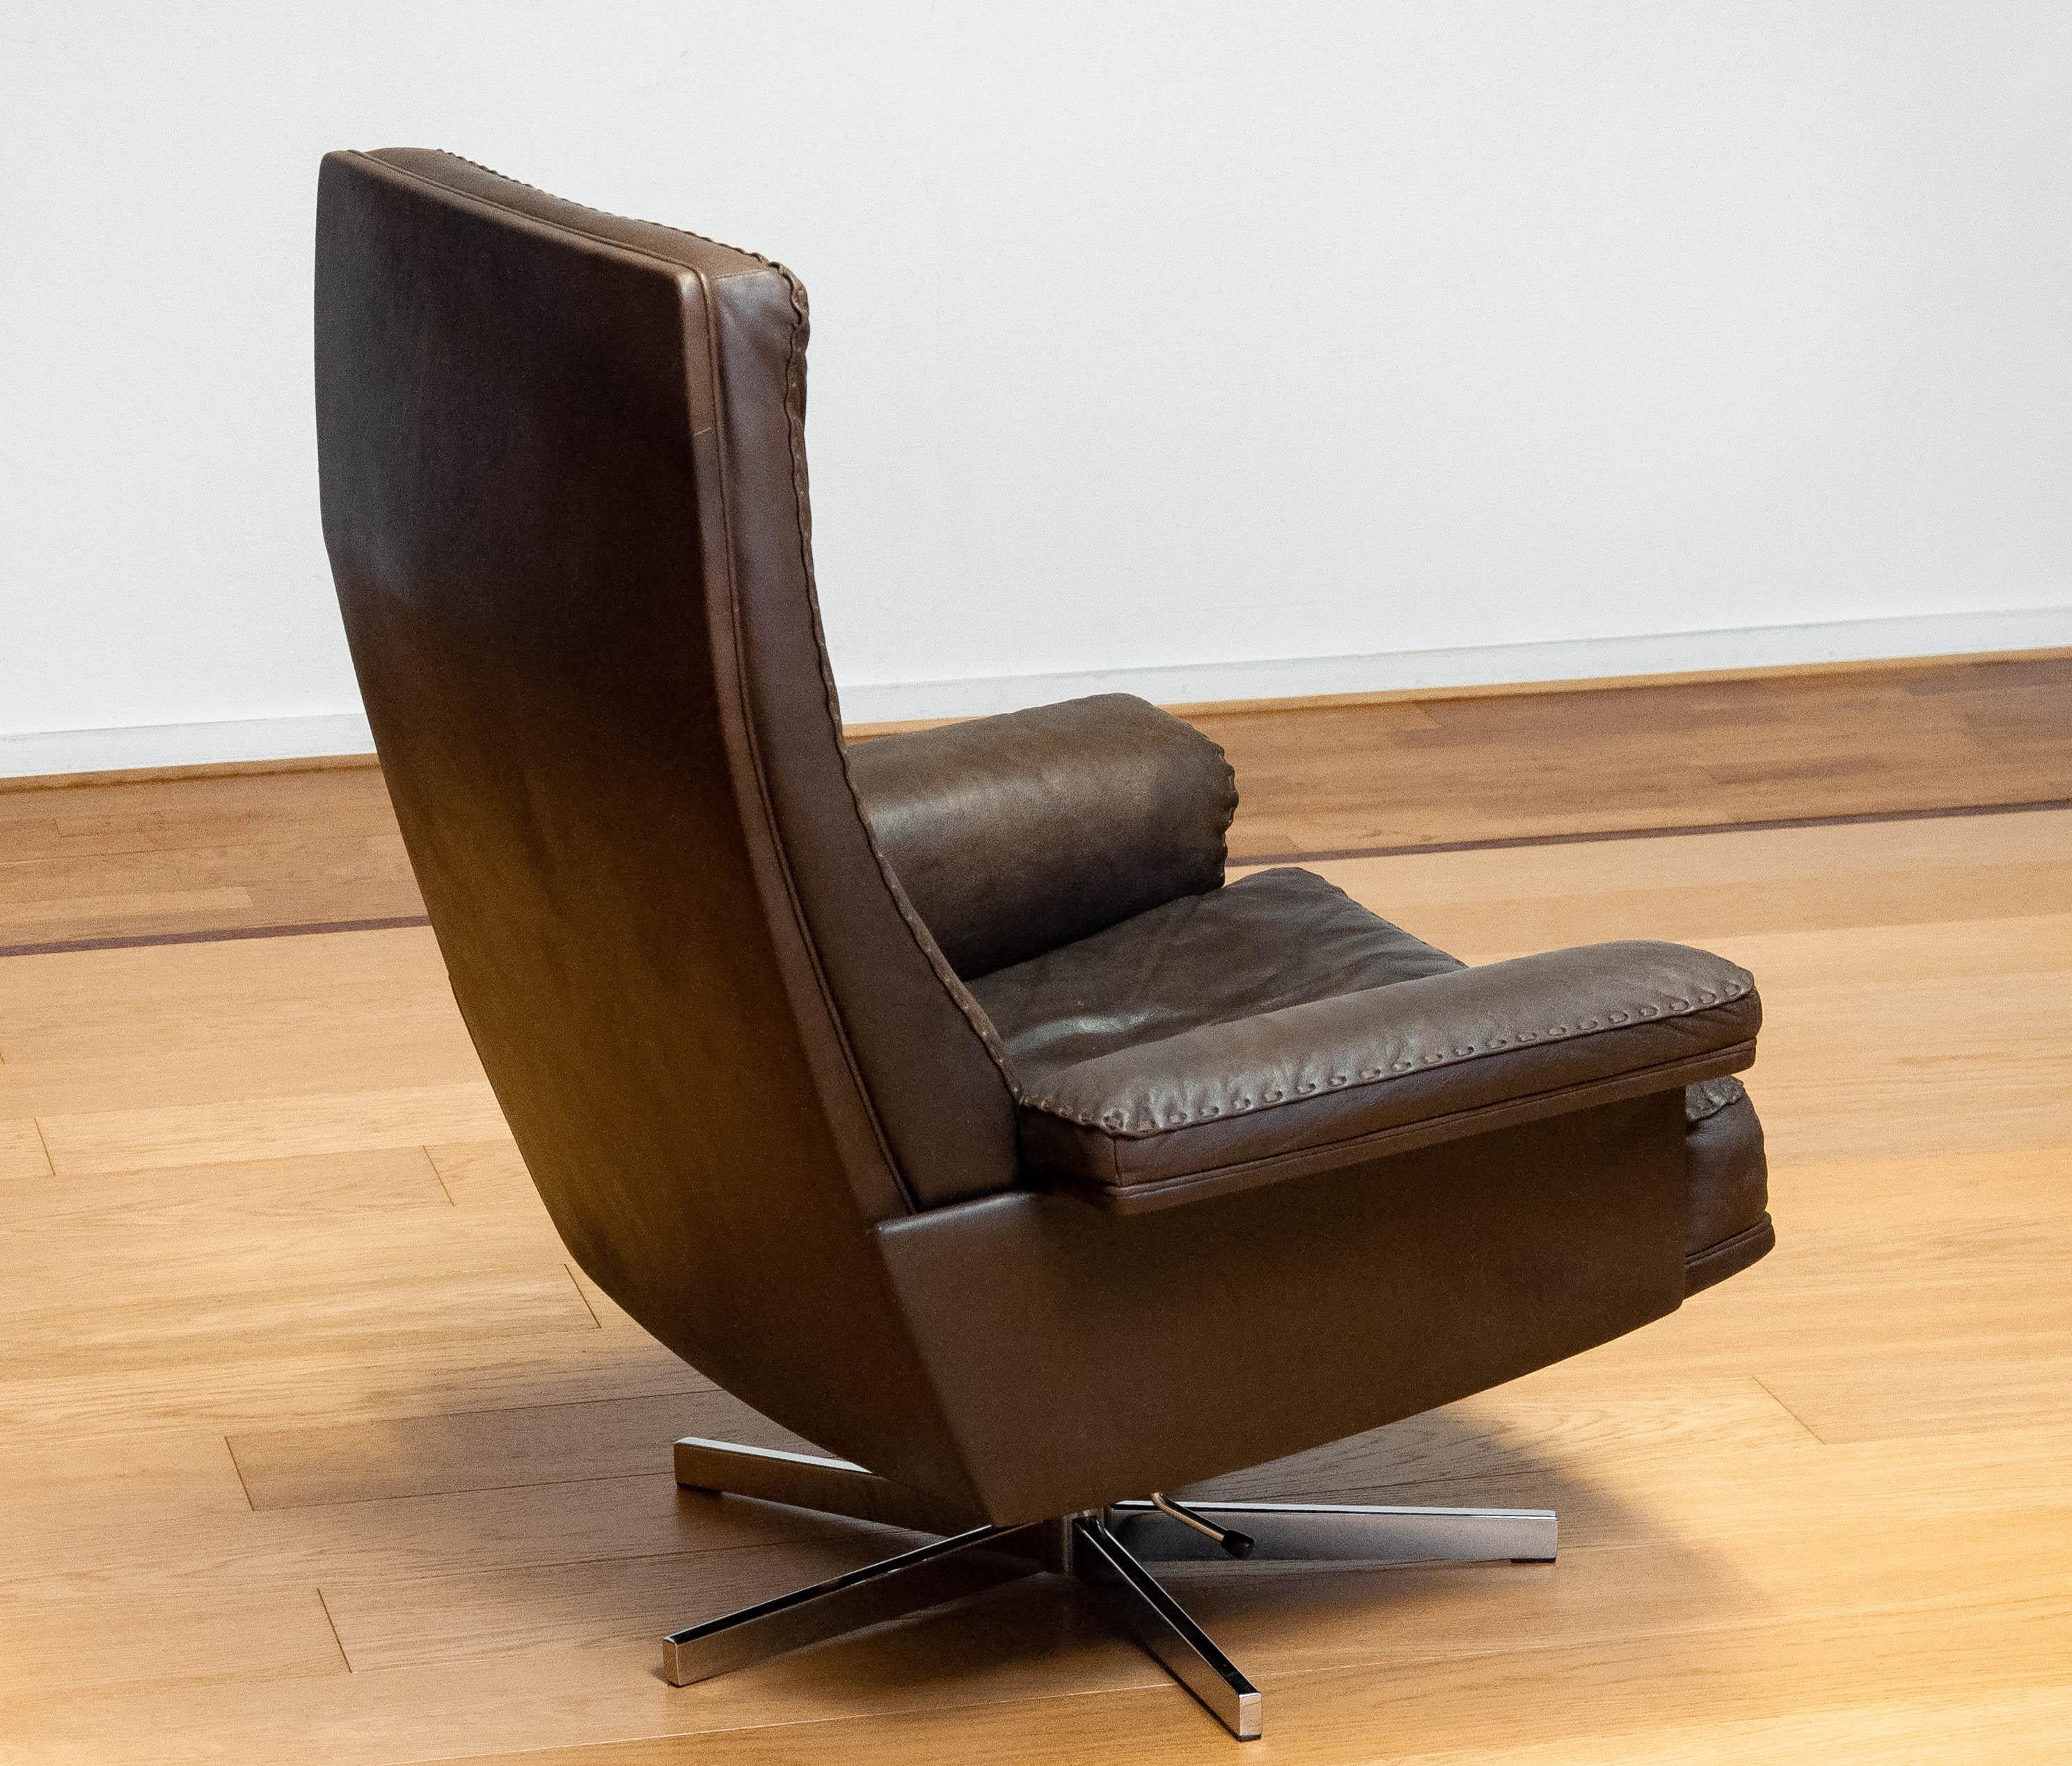 Late 20th Century 1970s Handstitched Brown Leather Swivel Chair with Chrome Base by De Sede DS-35